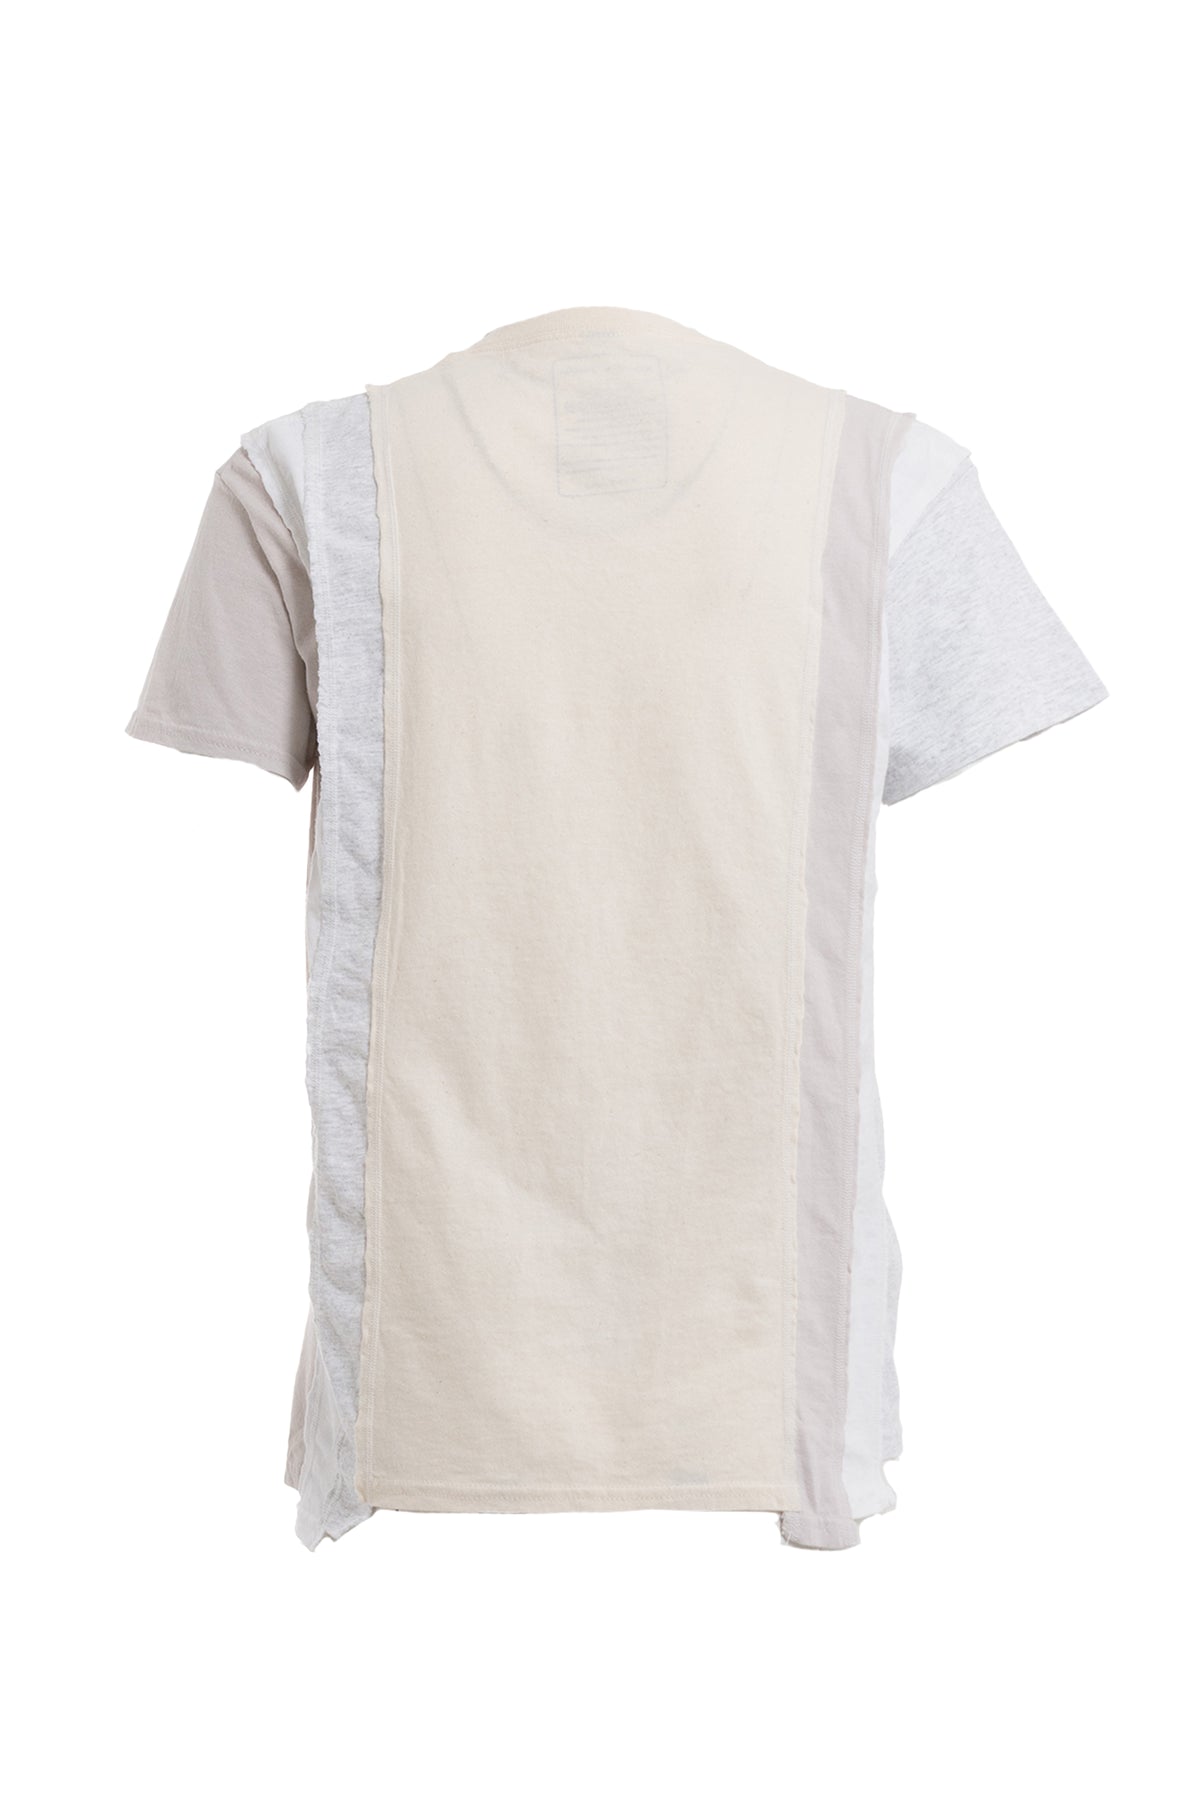 7 CUTS S/S TEE - SOLID / FADE / IVORY / S